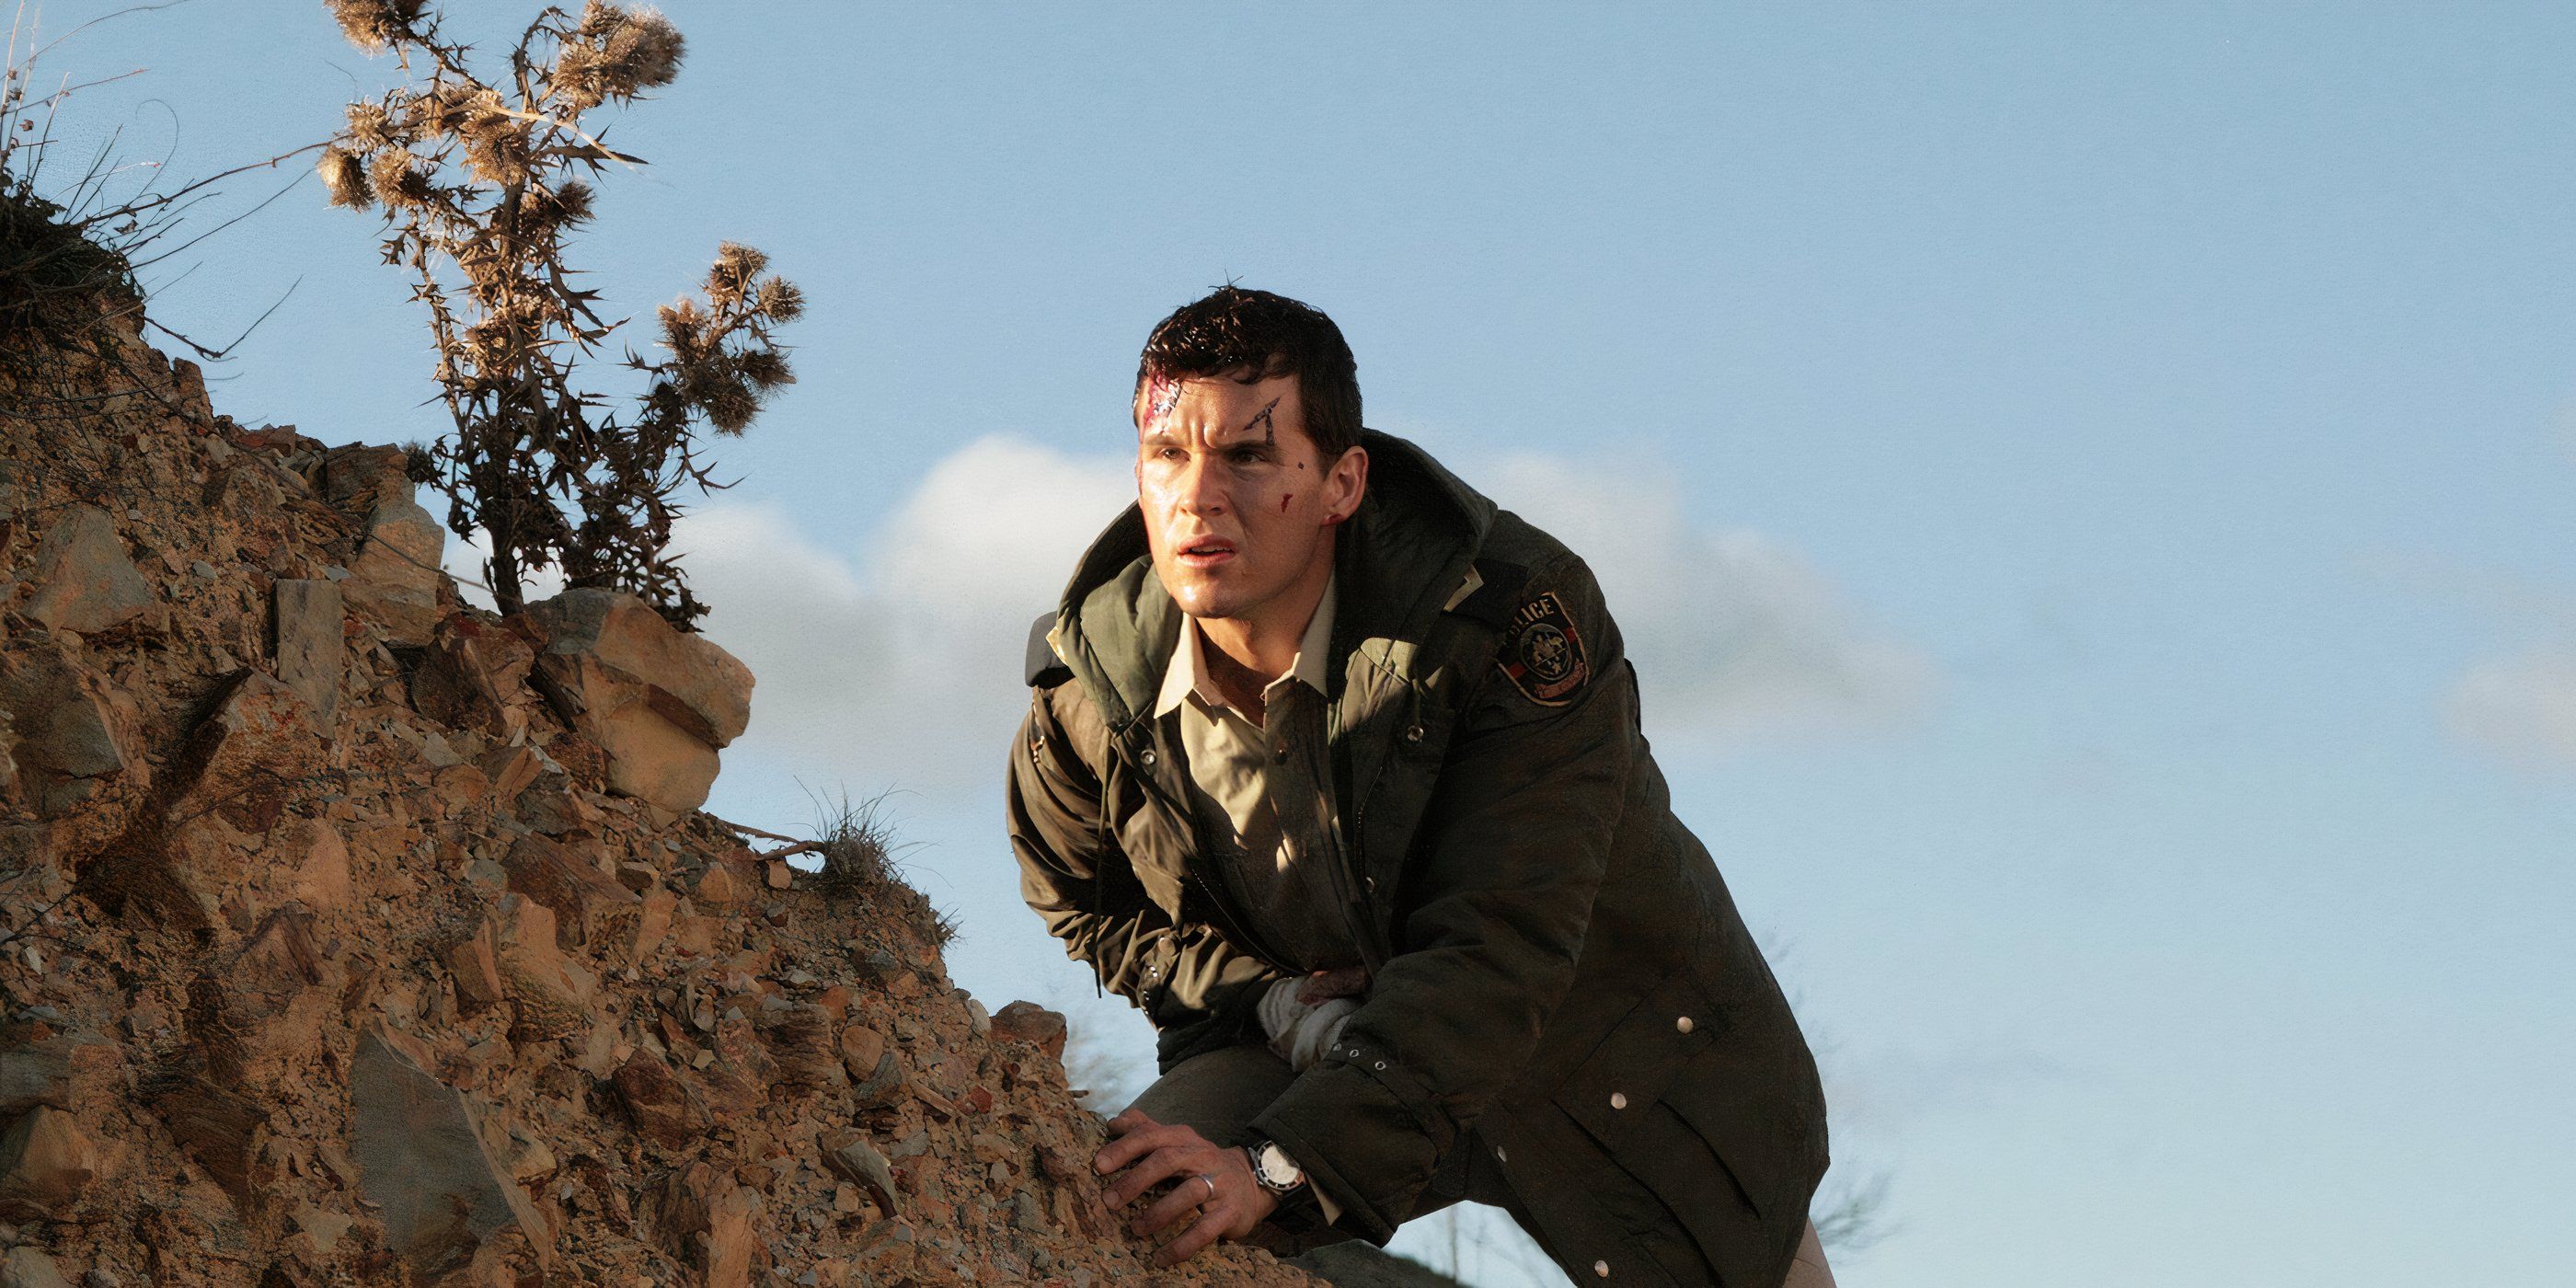 Police officer Shane Cooper (Ryan Kwanten) climbs a rocky hill will nursing a wounded hand as blood streams from his face in 'Red Hill' (2010).